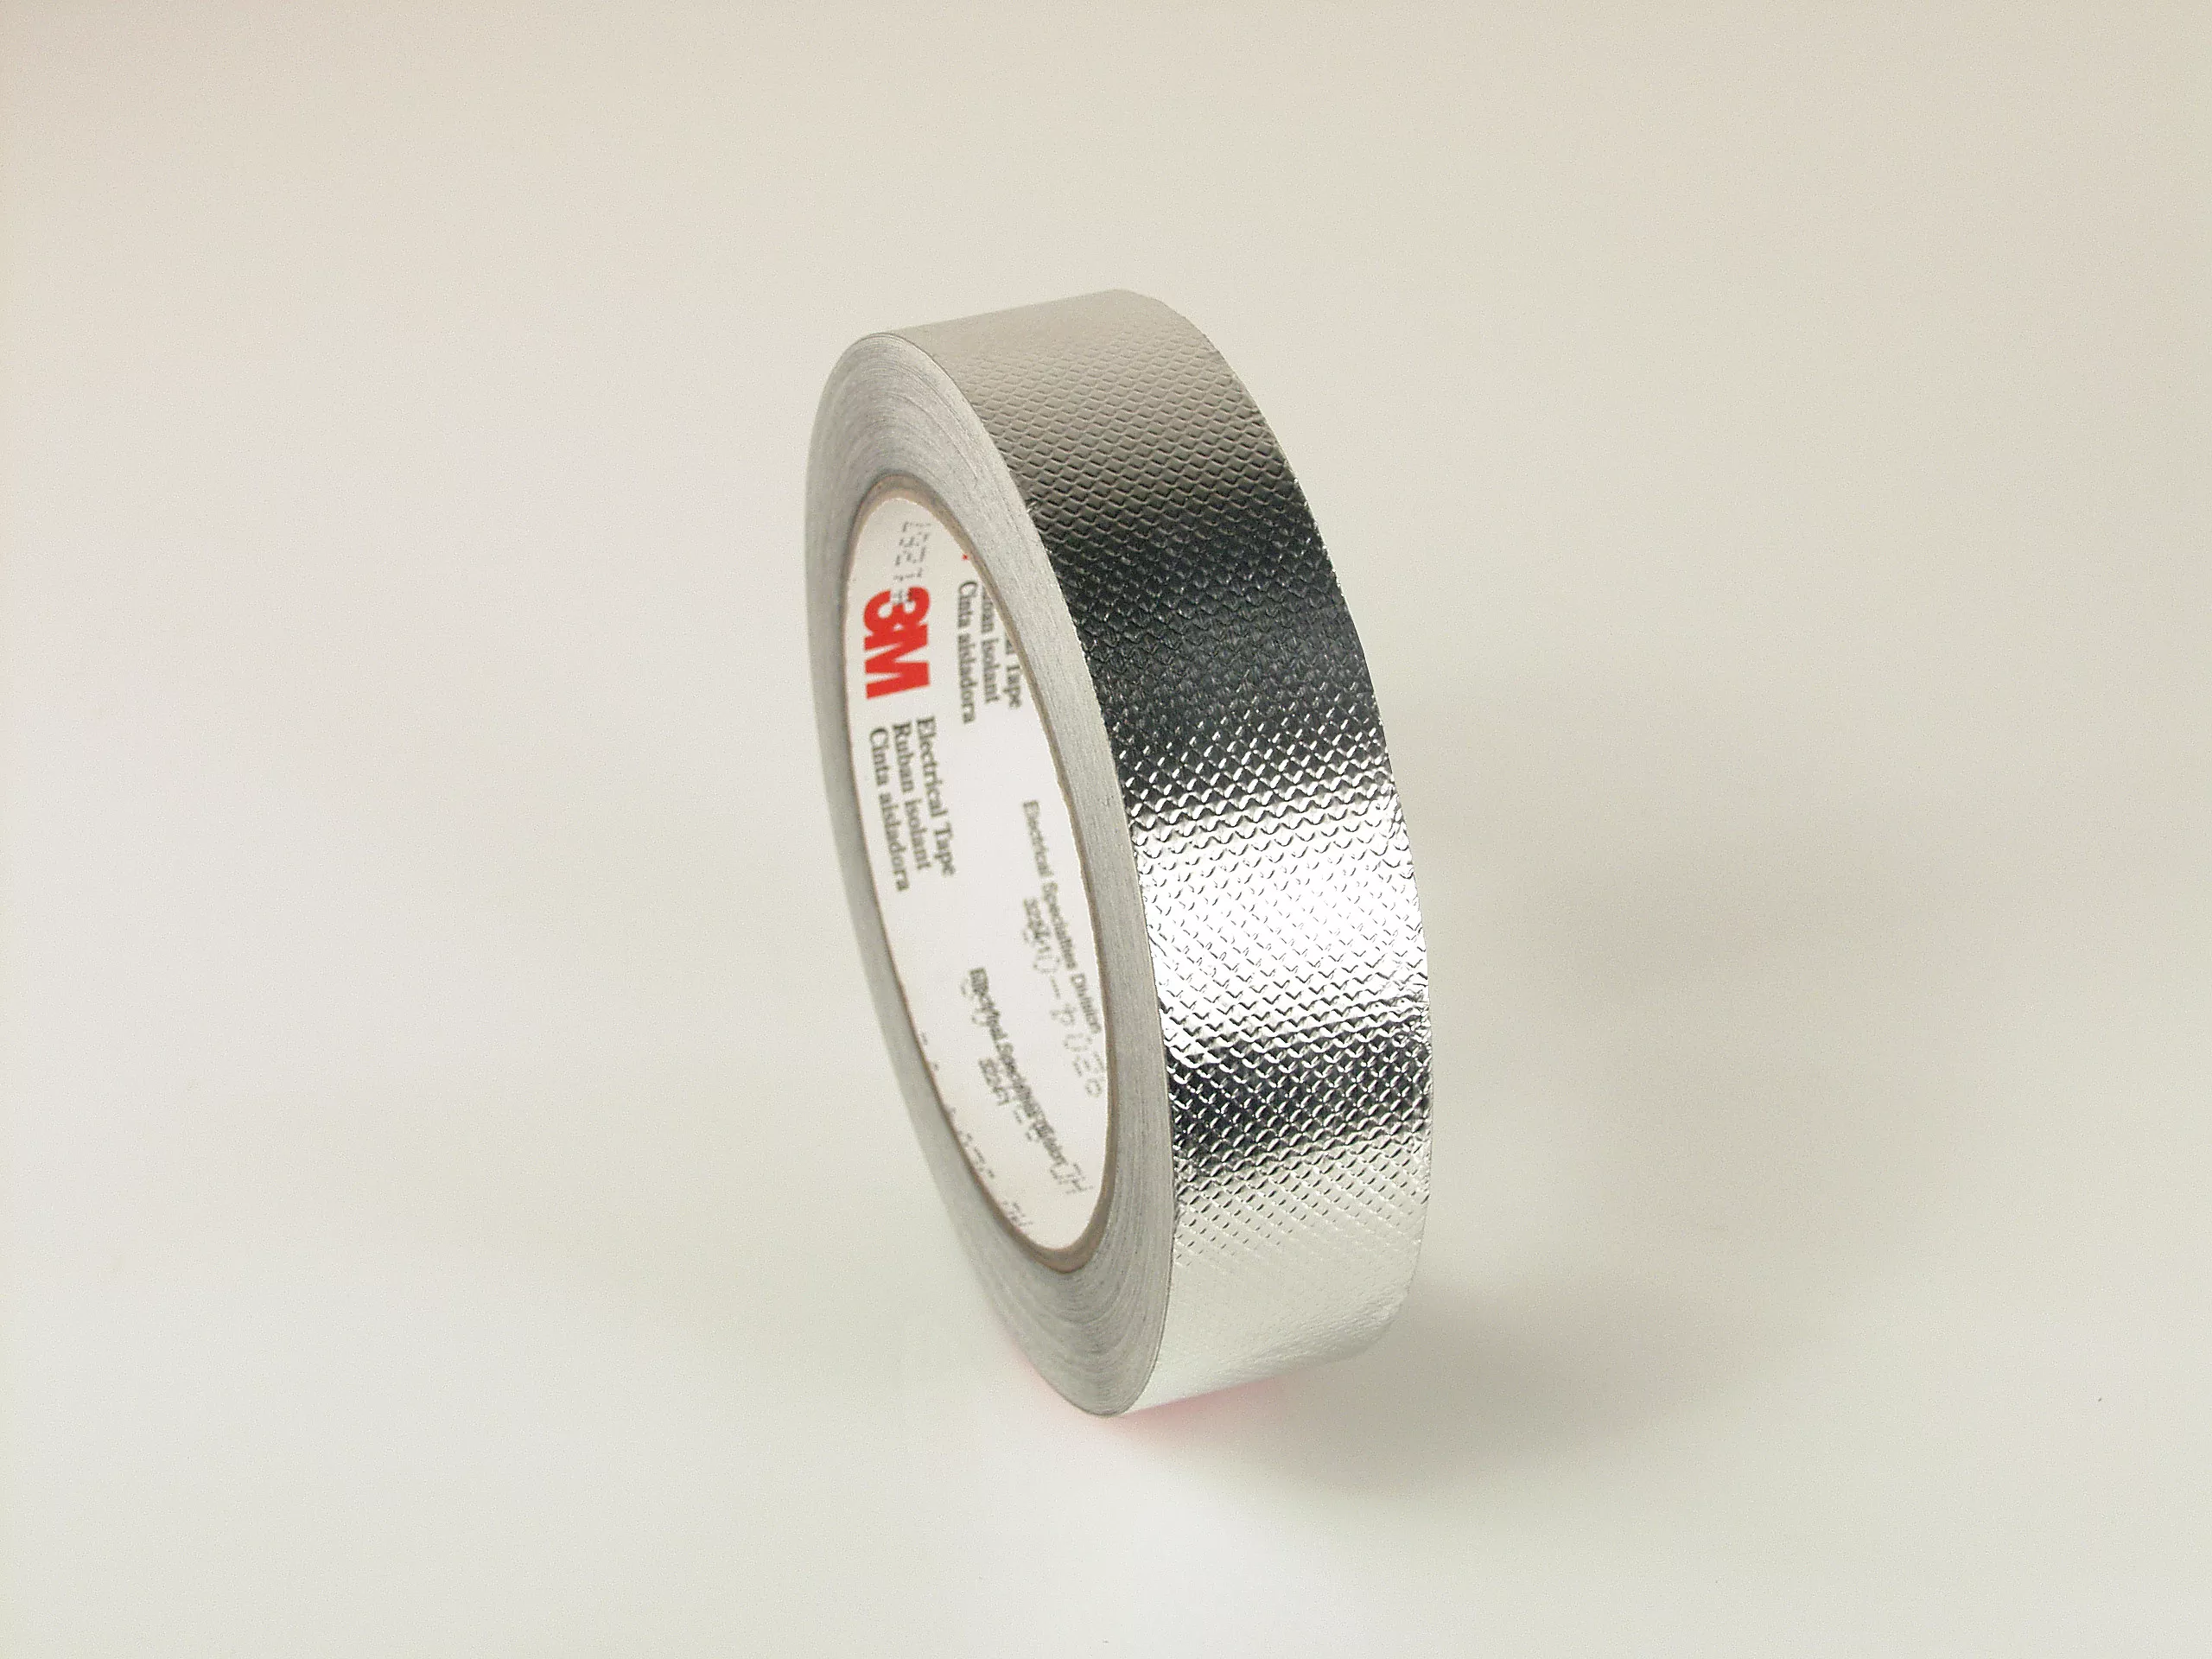 3M™ Embossed Aluminum Foil EMI Shielding Tape 1267, 23 in x 18 yd, 3 in
Paper Core, Untrimmed Potted Log Roll, 1 Roll/Case